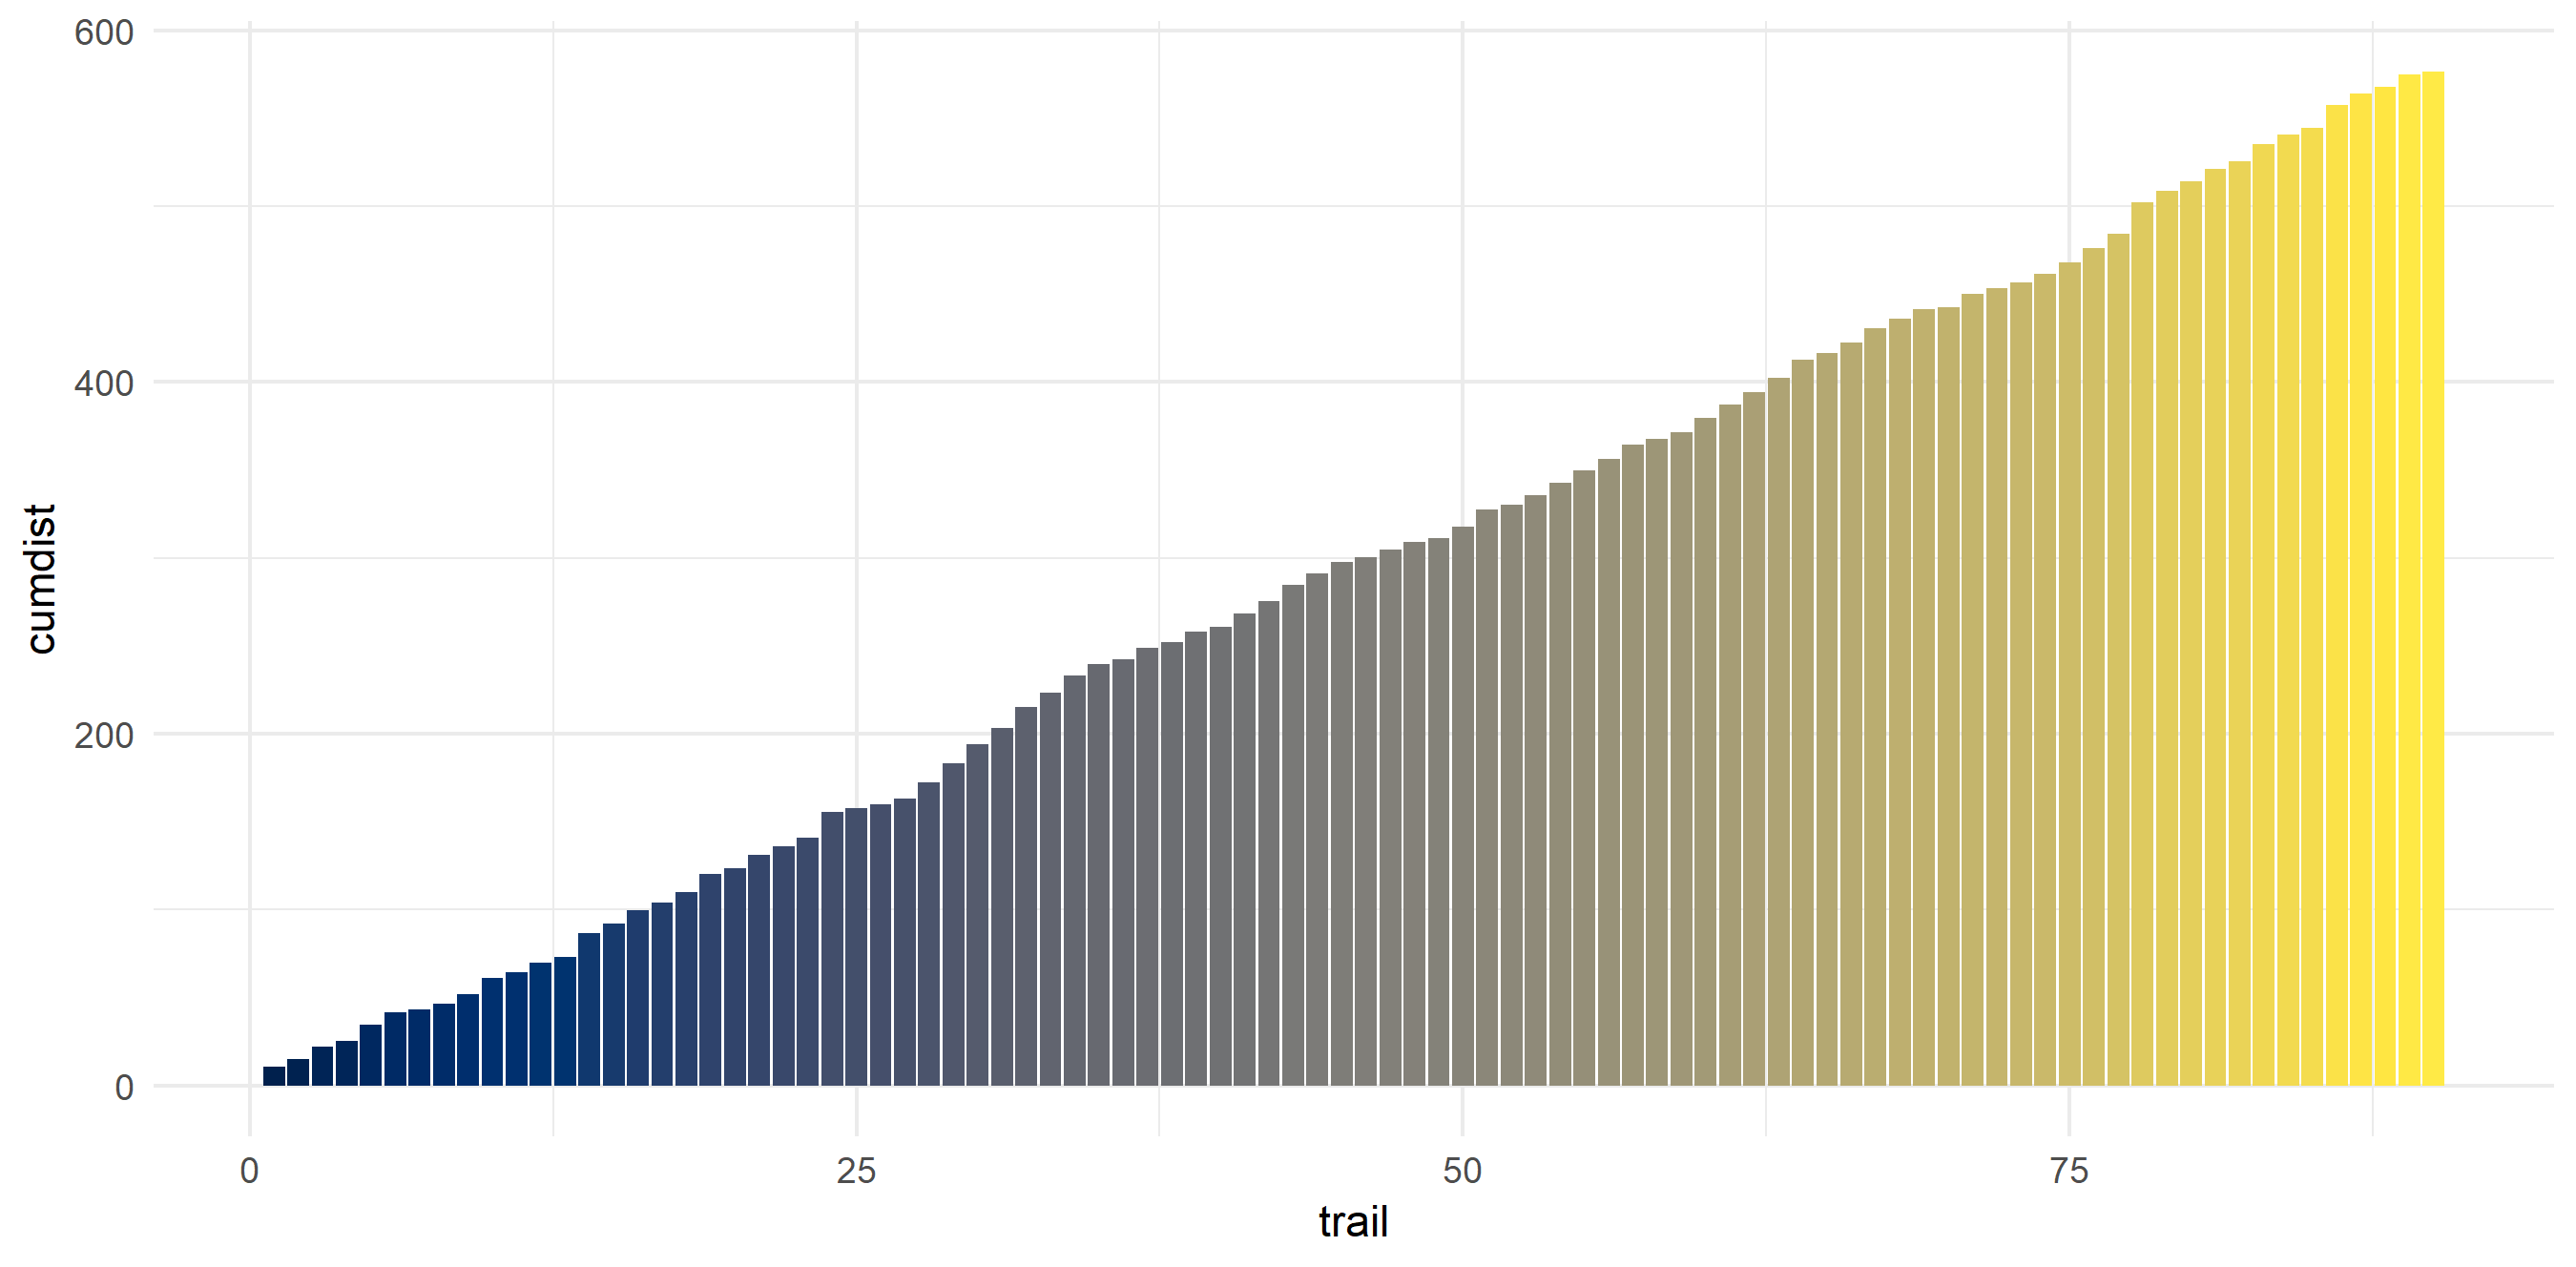 Cumulative bar plot of distance increasing from the left to the right colored by a gradient